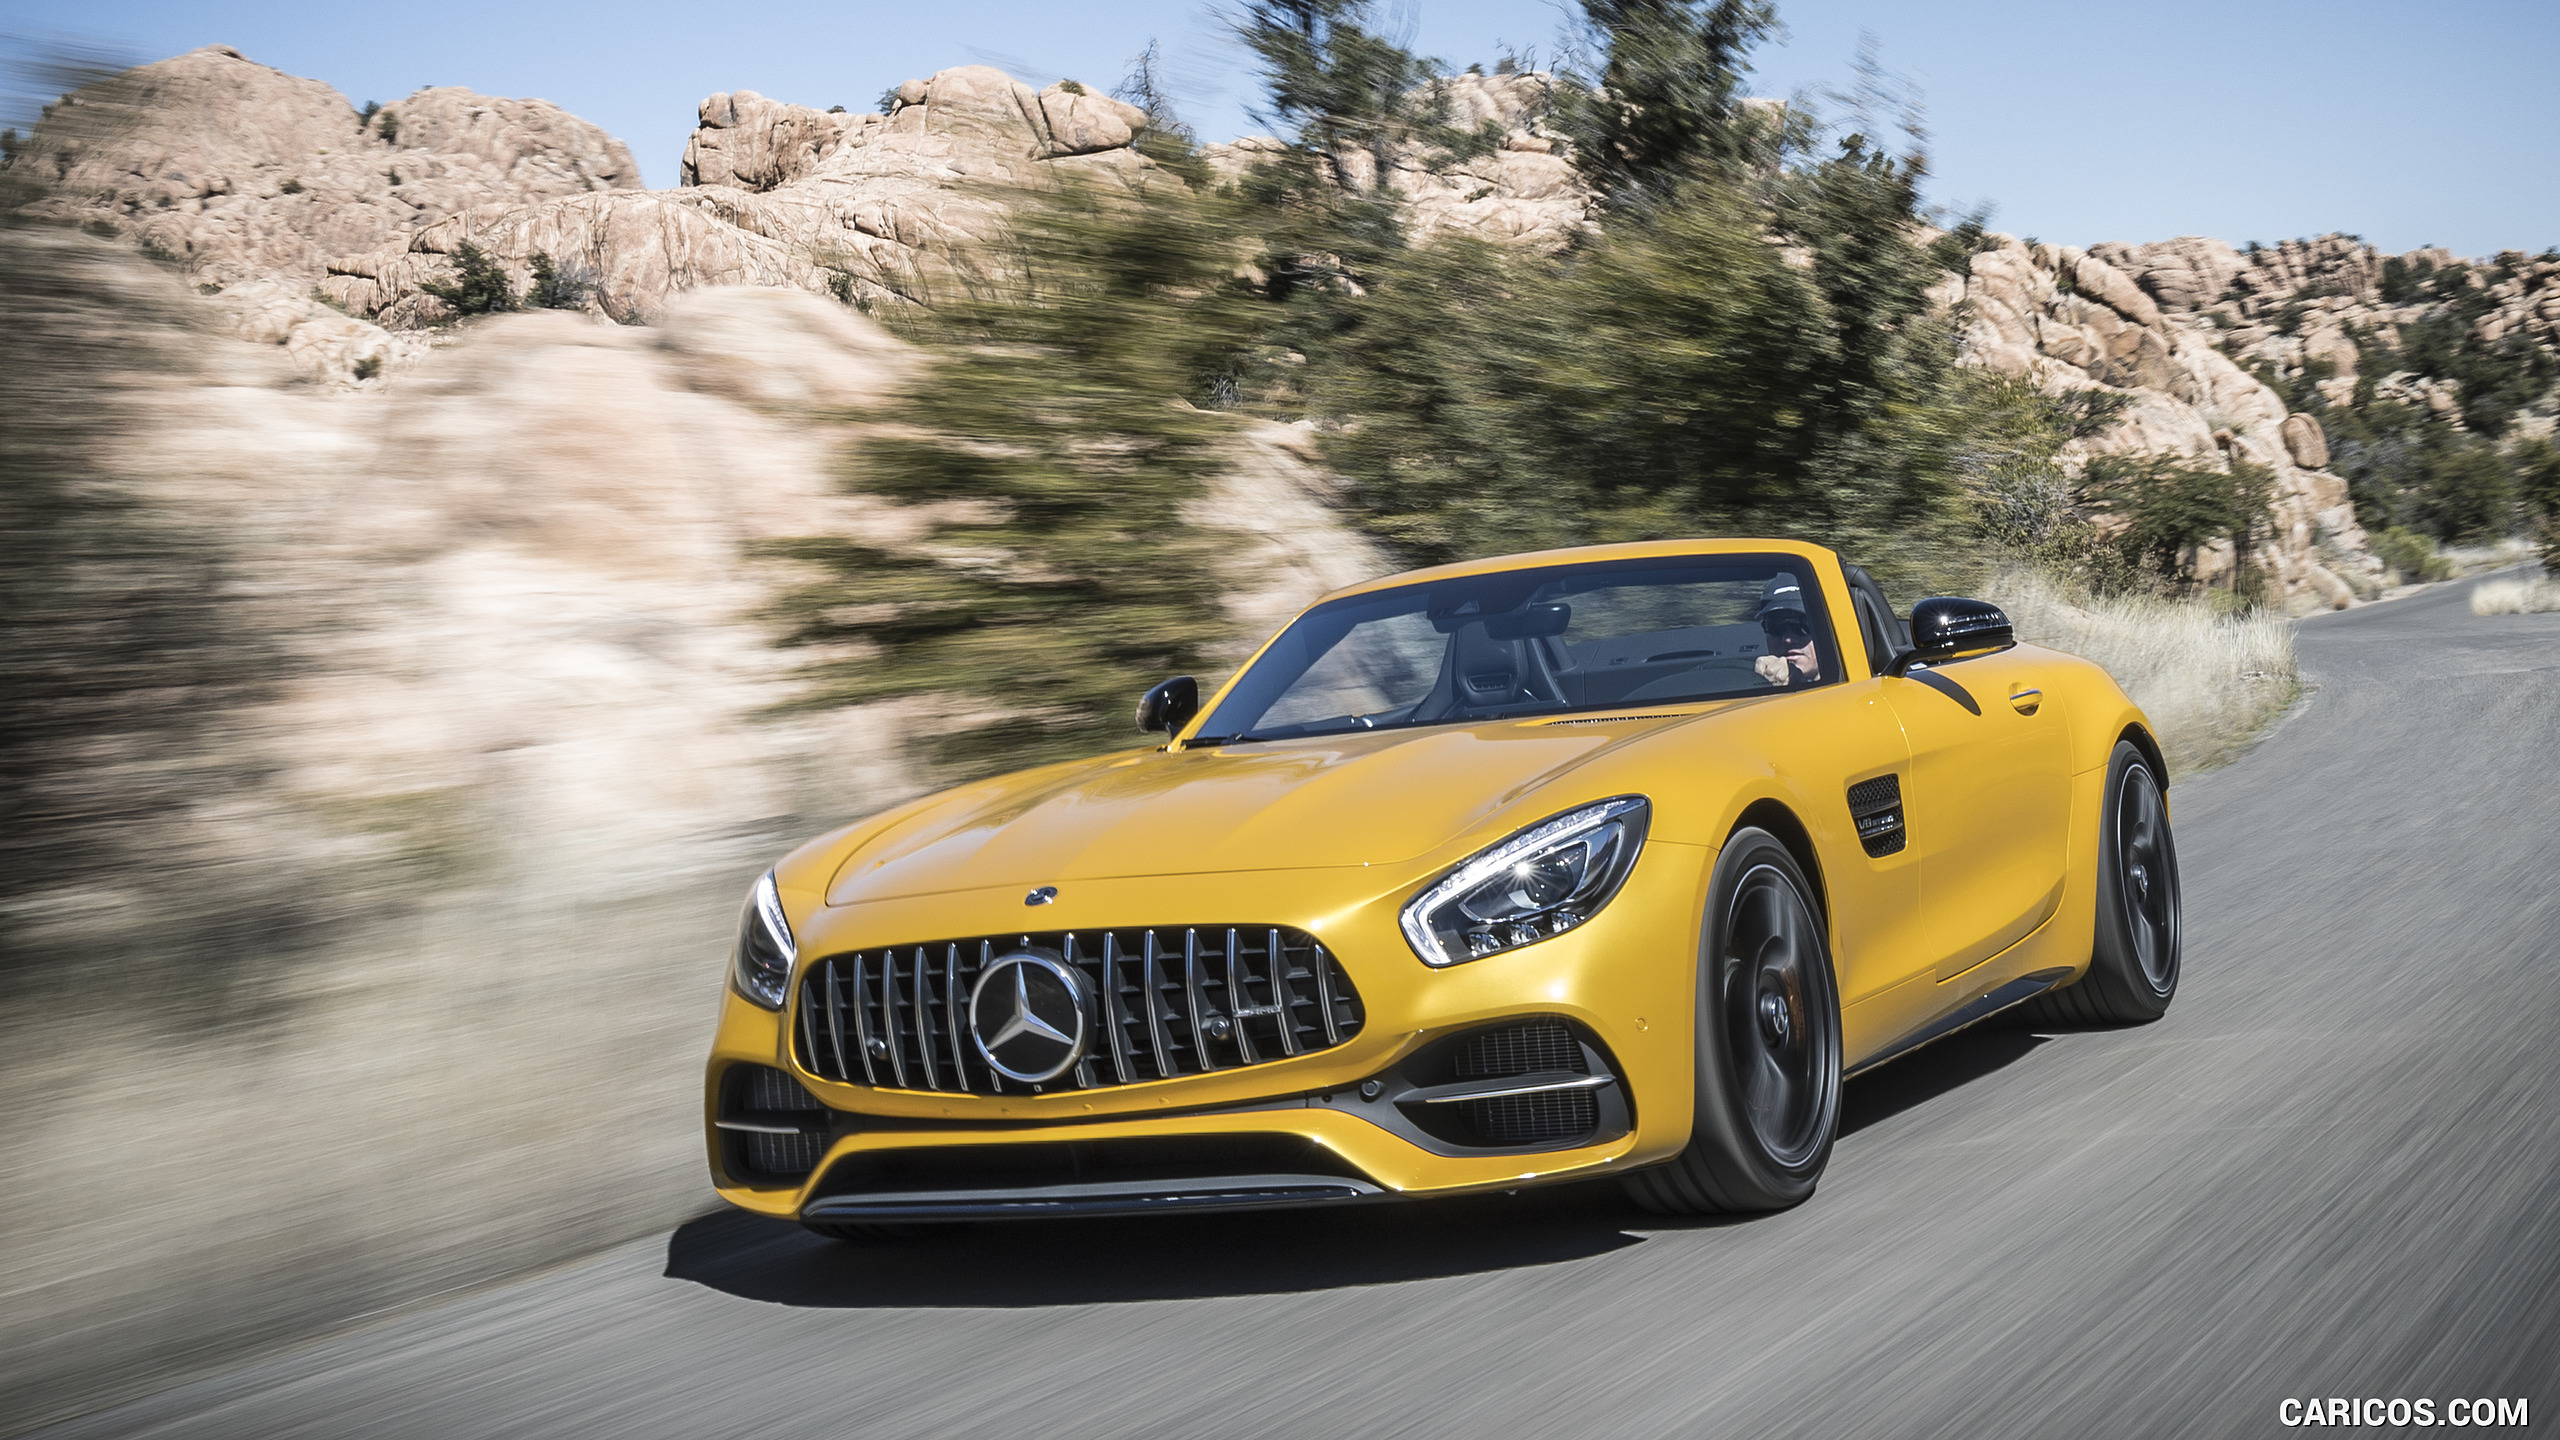 2018 Mercedes-AMG GT C Roadster - Front, #184 of 350